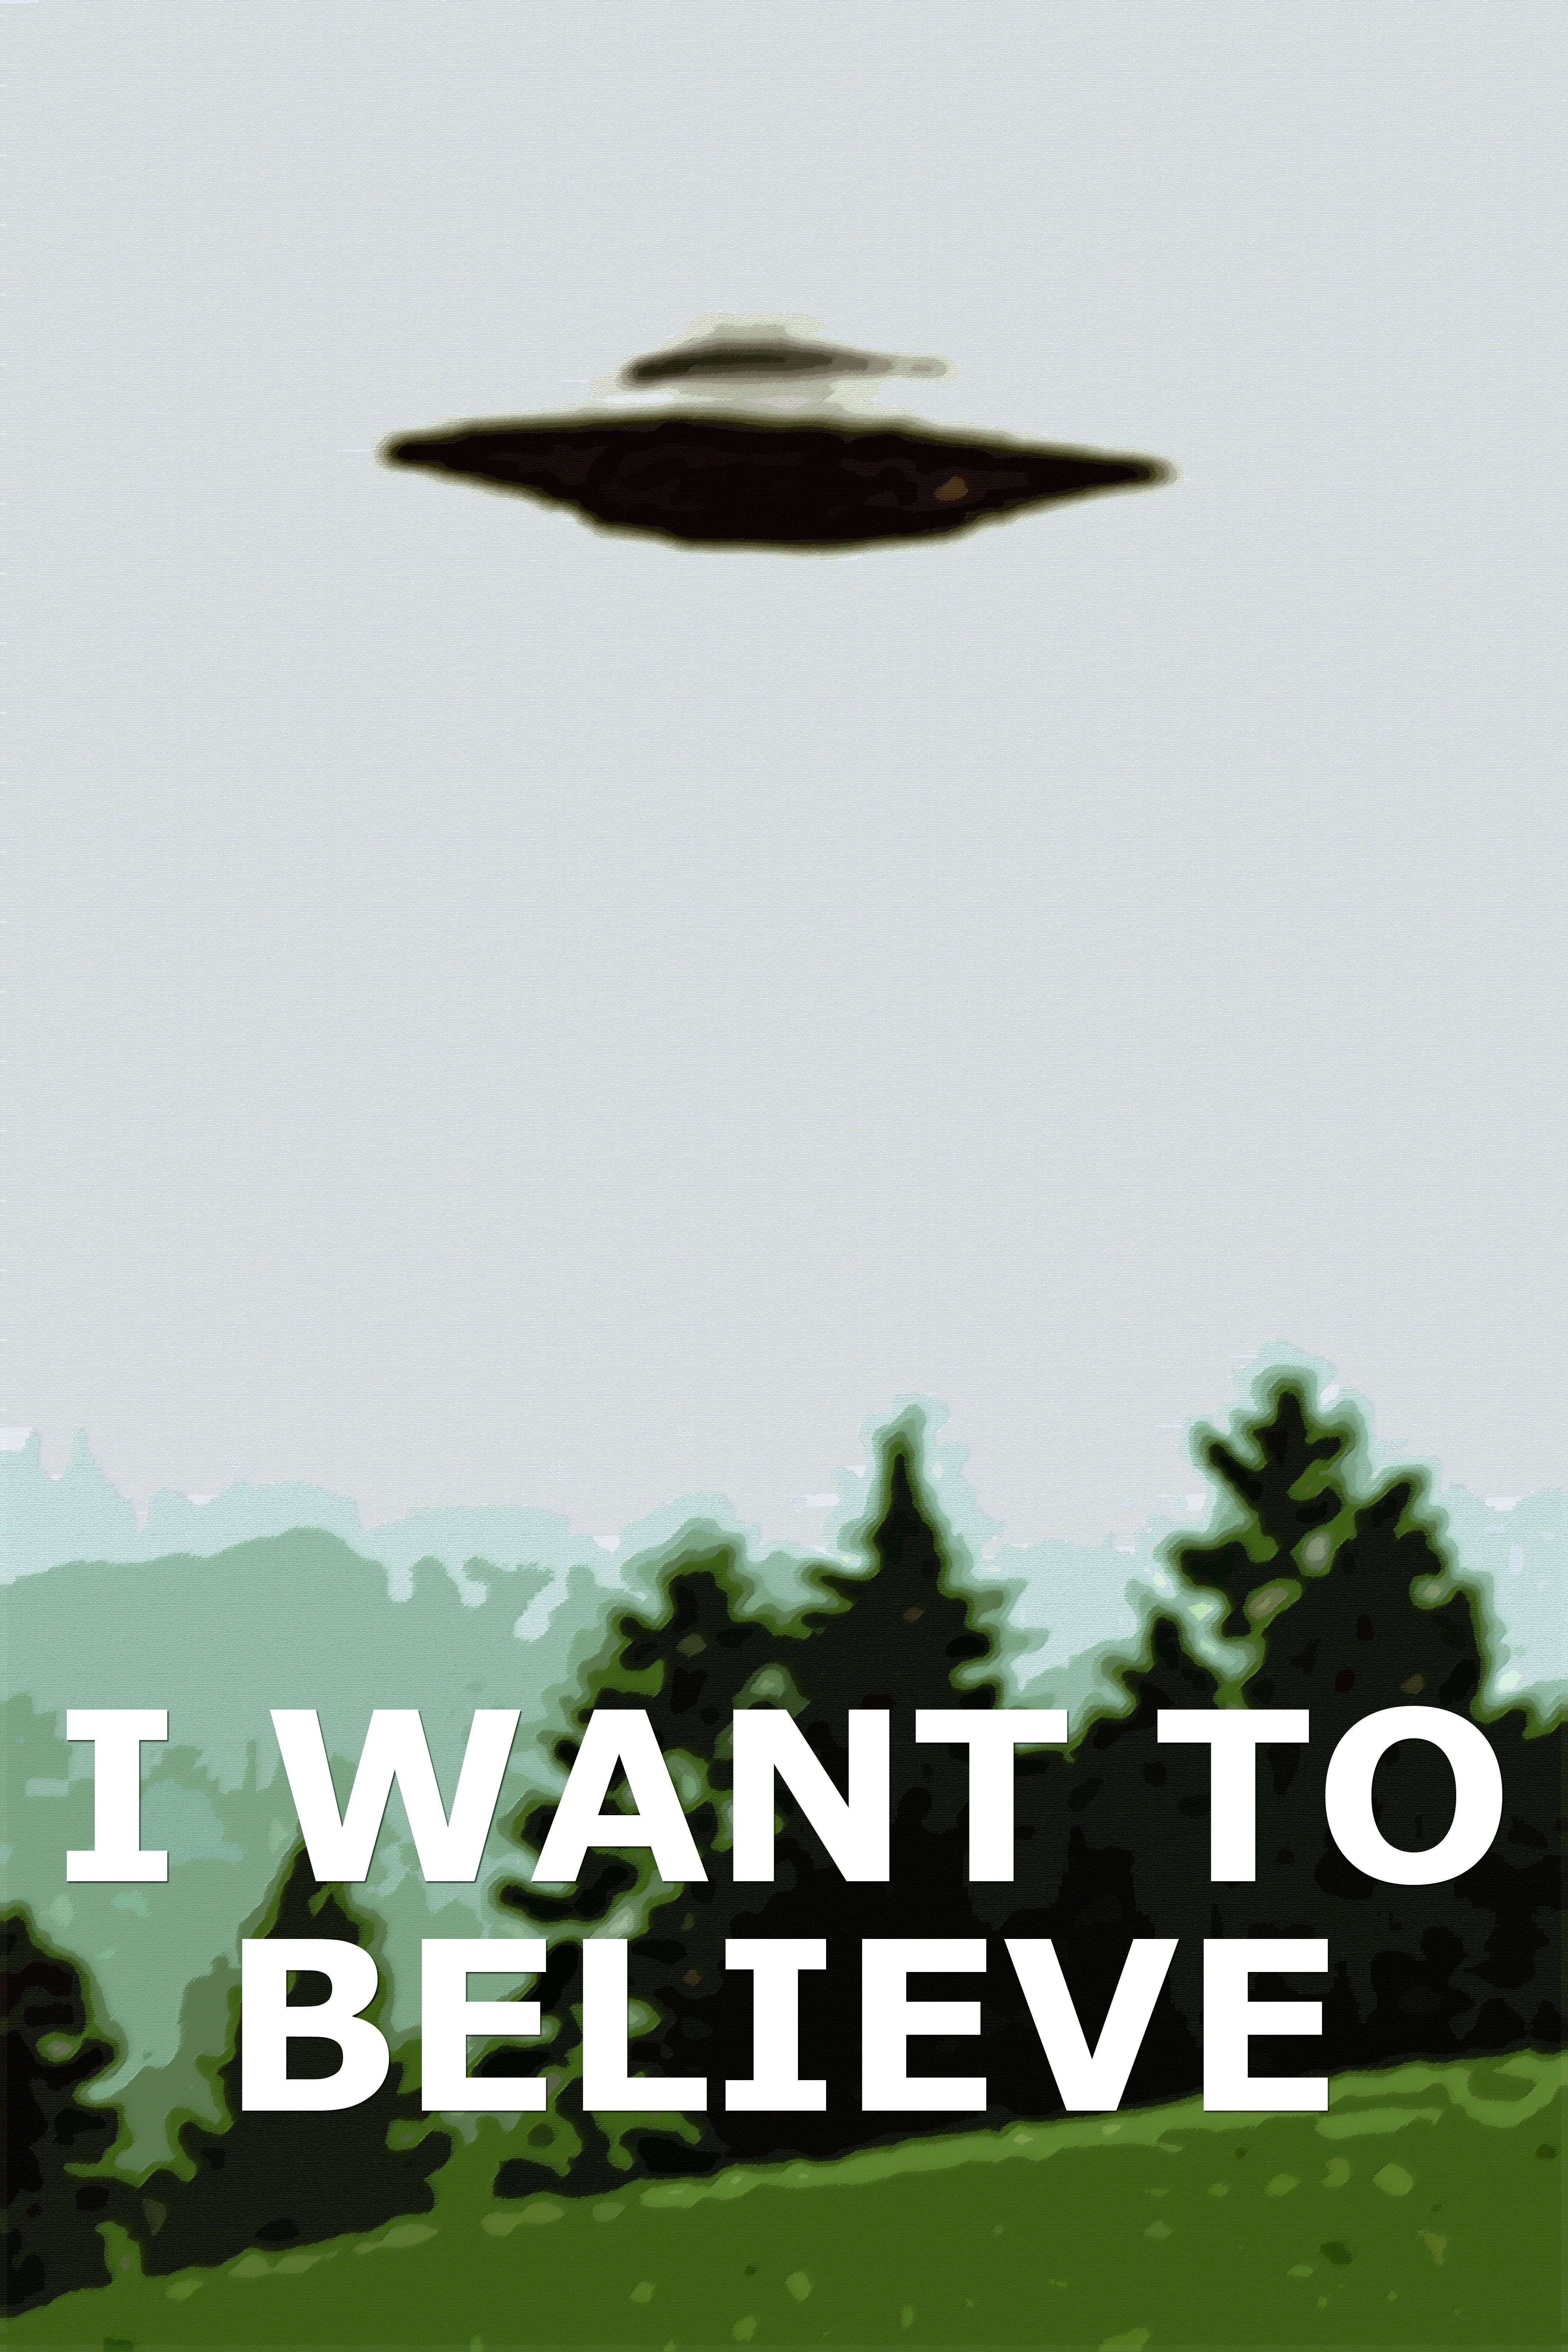 I want a new one. Постер i want to believe. Секретные материалы Постер i want to believe. Плакат Малдера i want to believe. X files i want to believe плакат.